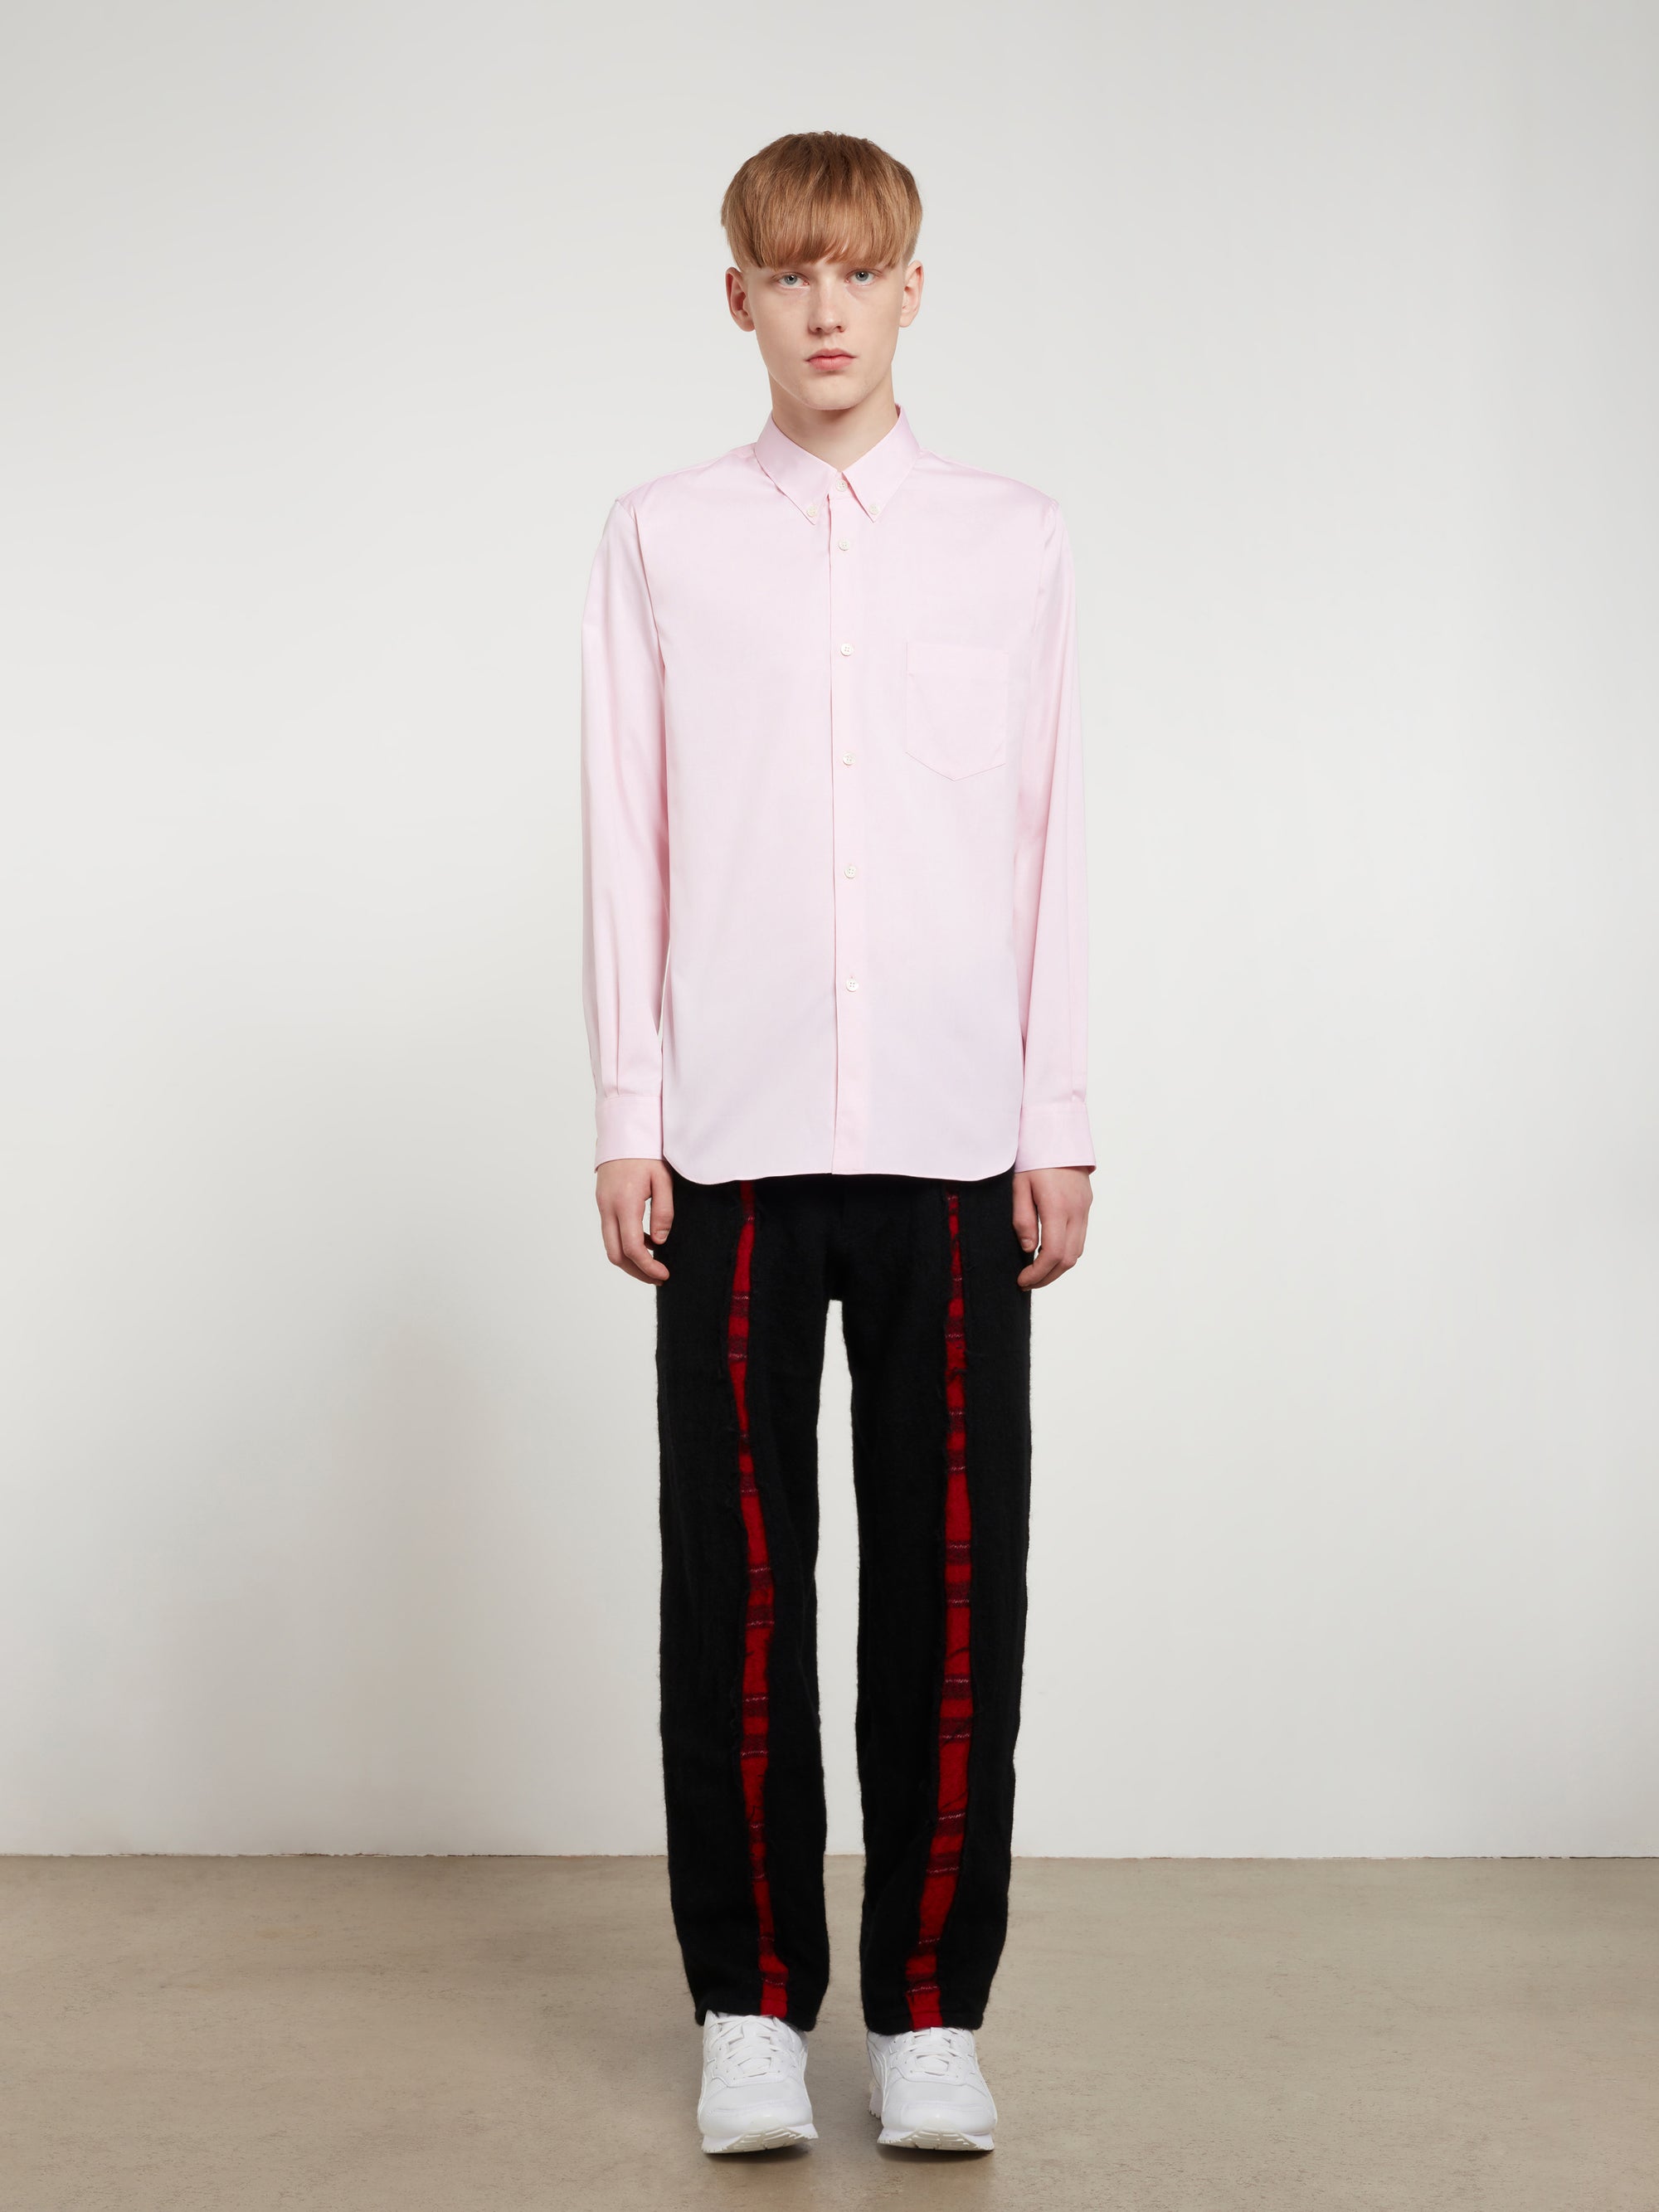 CDG Shirt Forever - Slim Fit Button-Down Cotton Shirt - (Pink) view 5